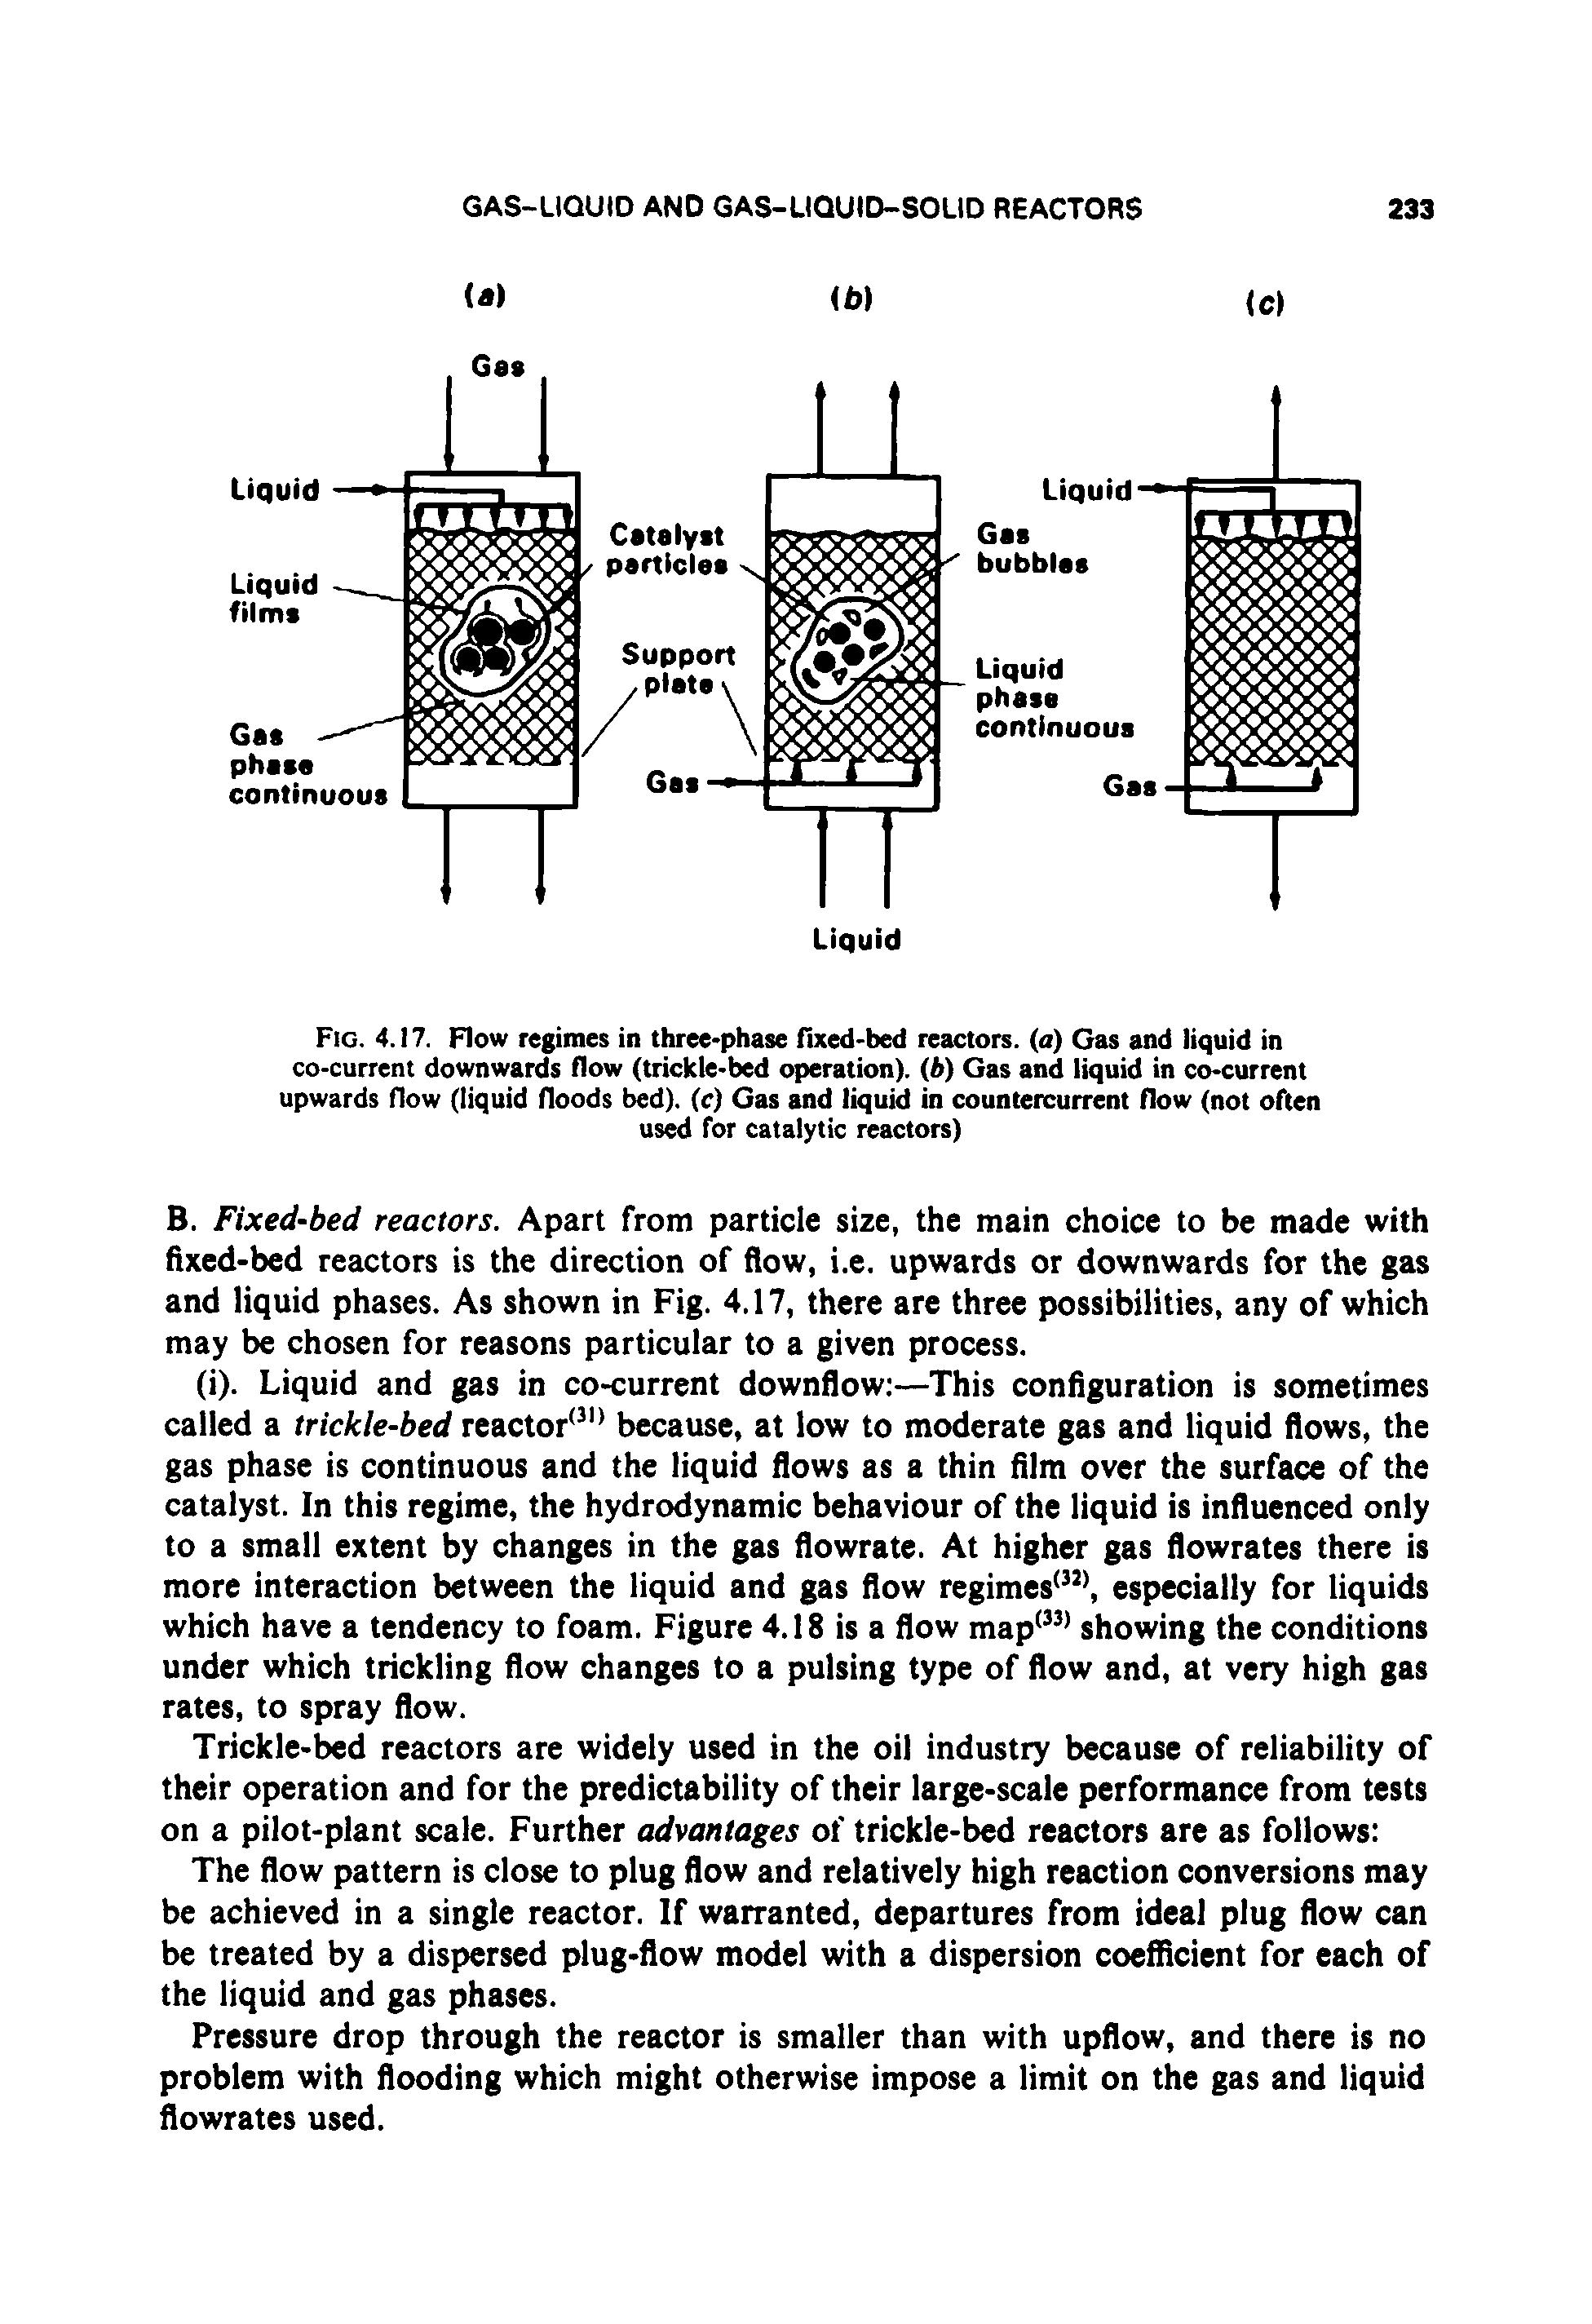 Fig. 4.17. Flow regimes in three-phase fixed-bed reactors, (a) Gas and liquid in co-current downwards flow (trickle-bed operation). (b) Gas and liquid in co-current upwards flow (liquid floods bed), (c) Gas and liquid in countercurrent flow (not often used for catalytic reactors)...